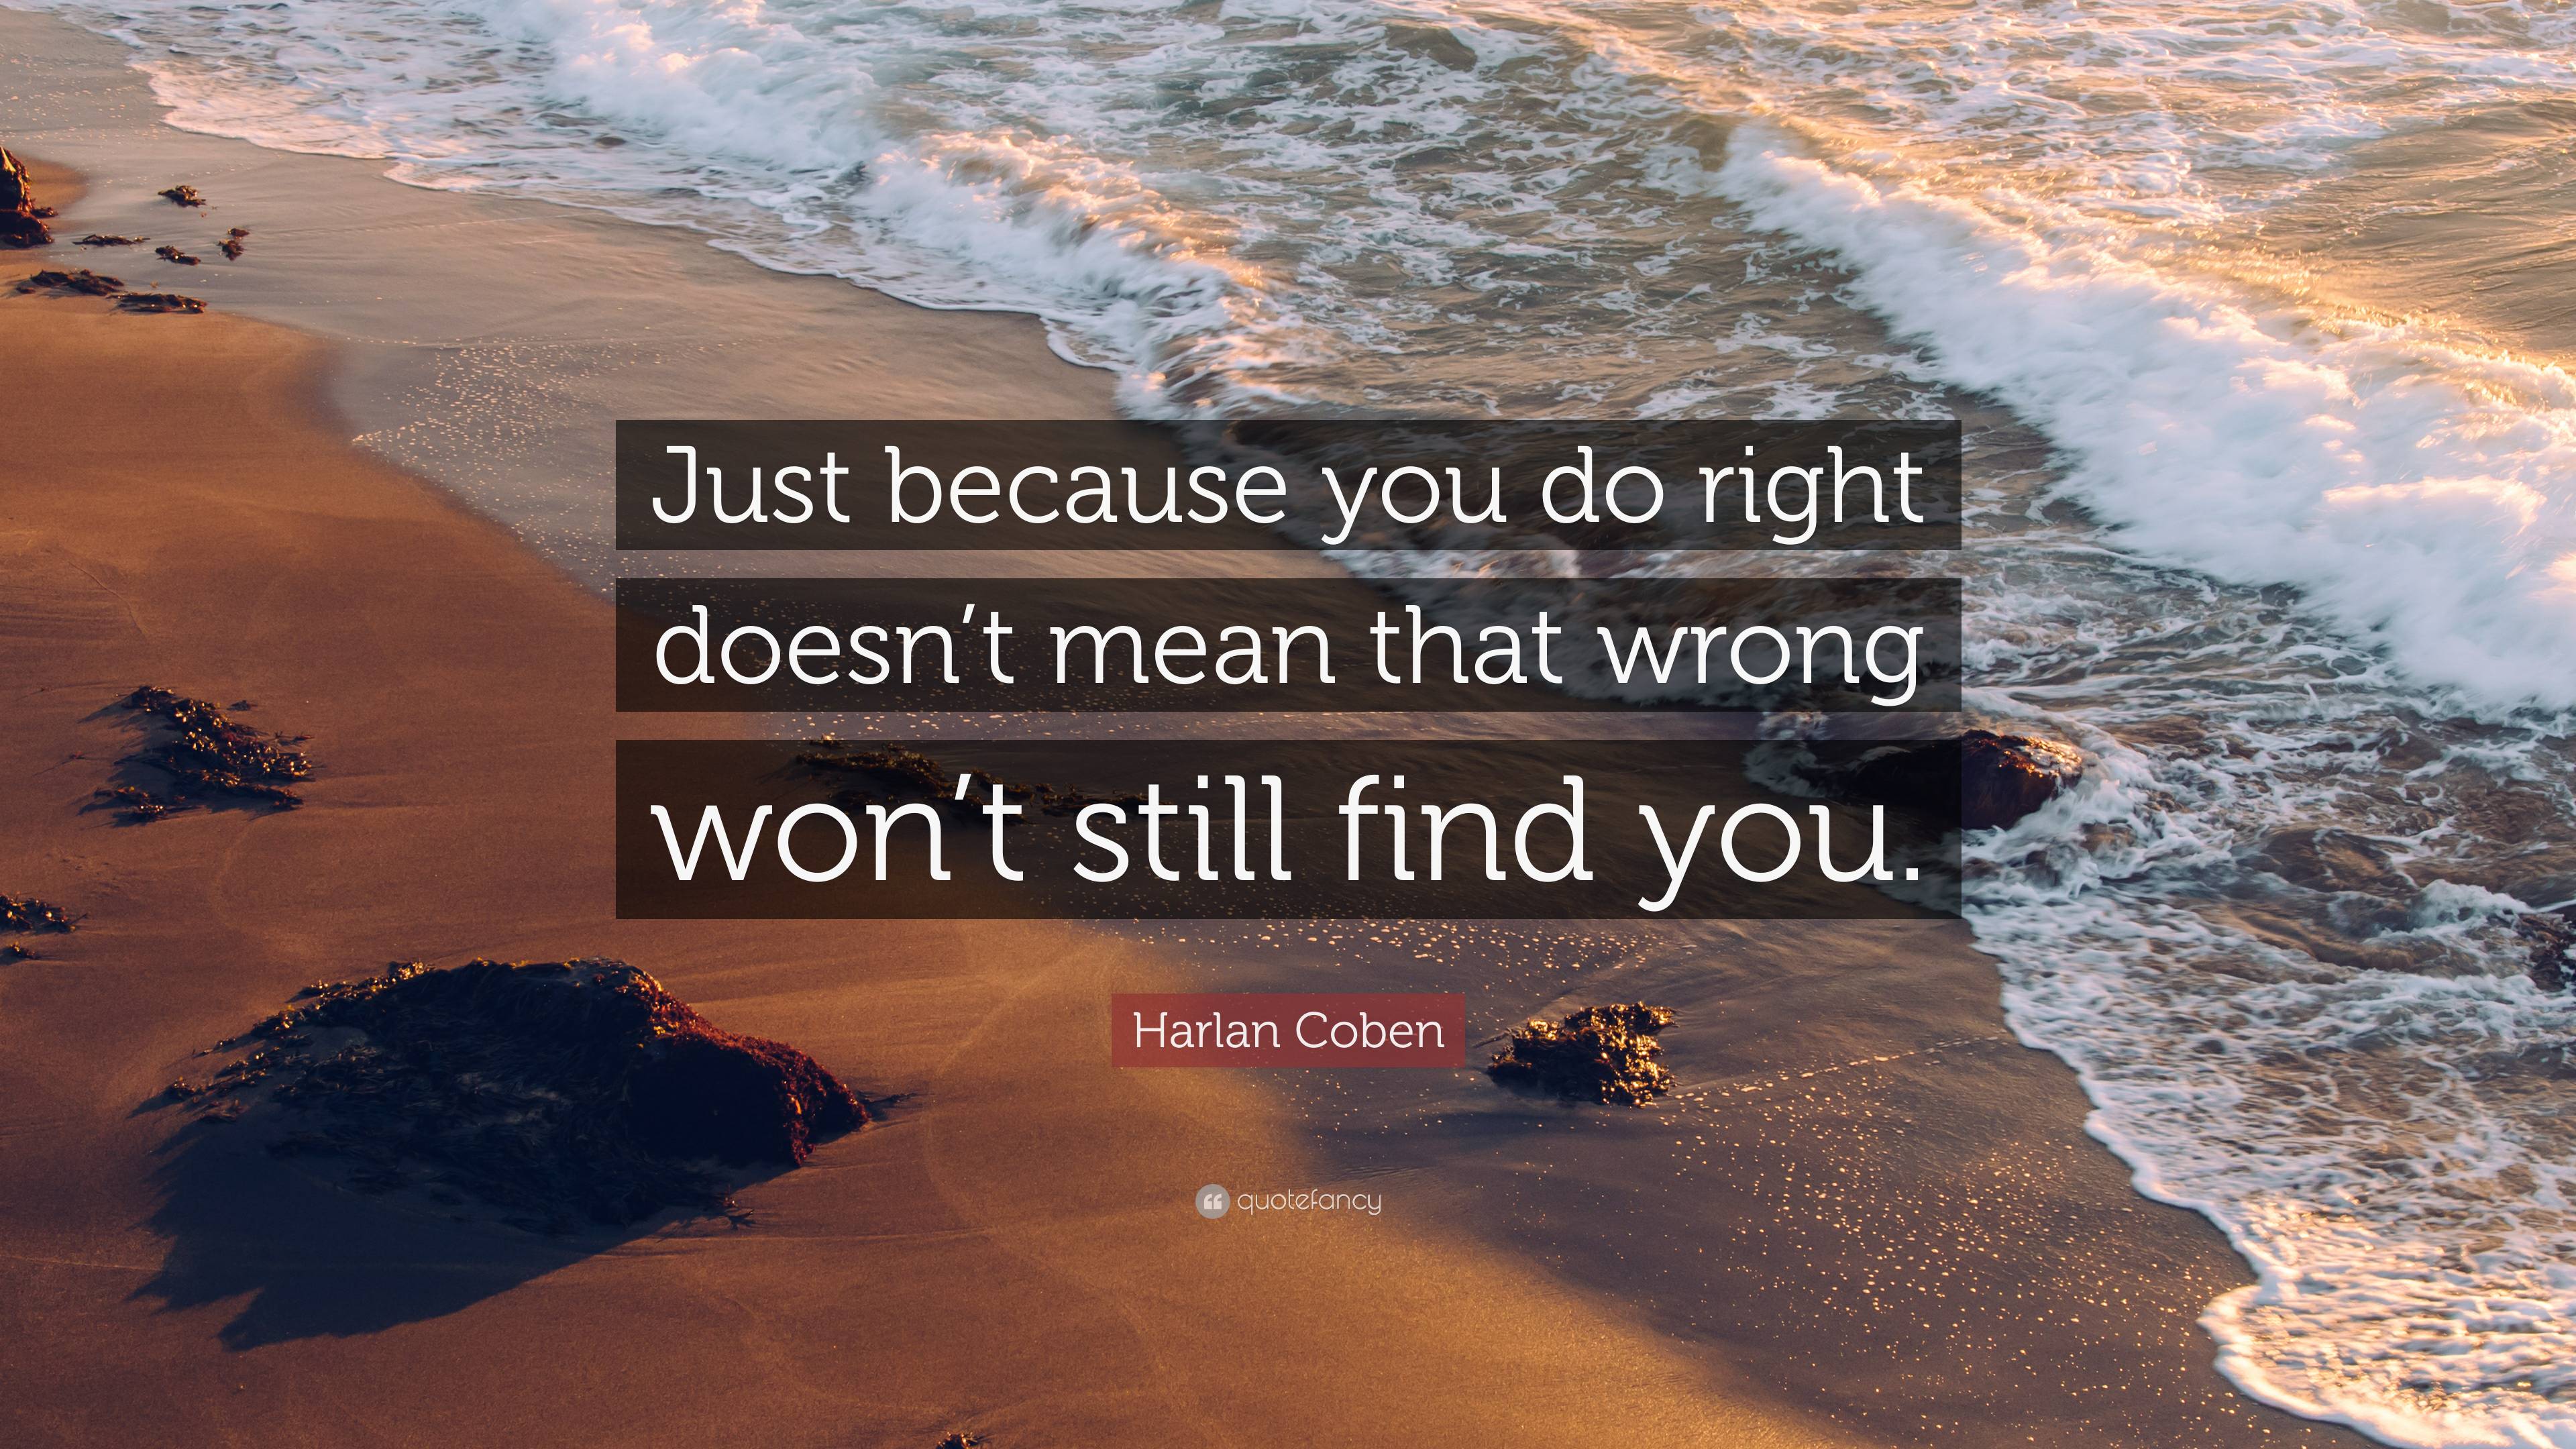 Harlan Coben Quote: “Just because you do right doesn’t mean that wrong ...